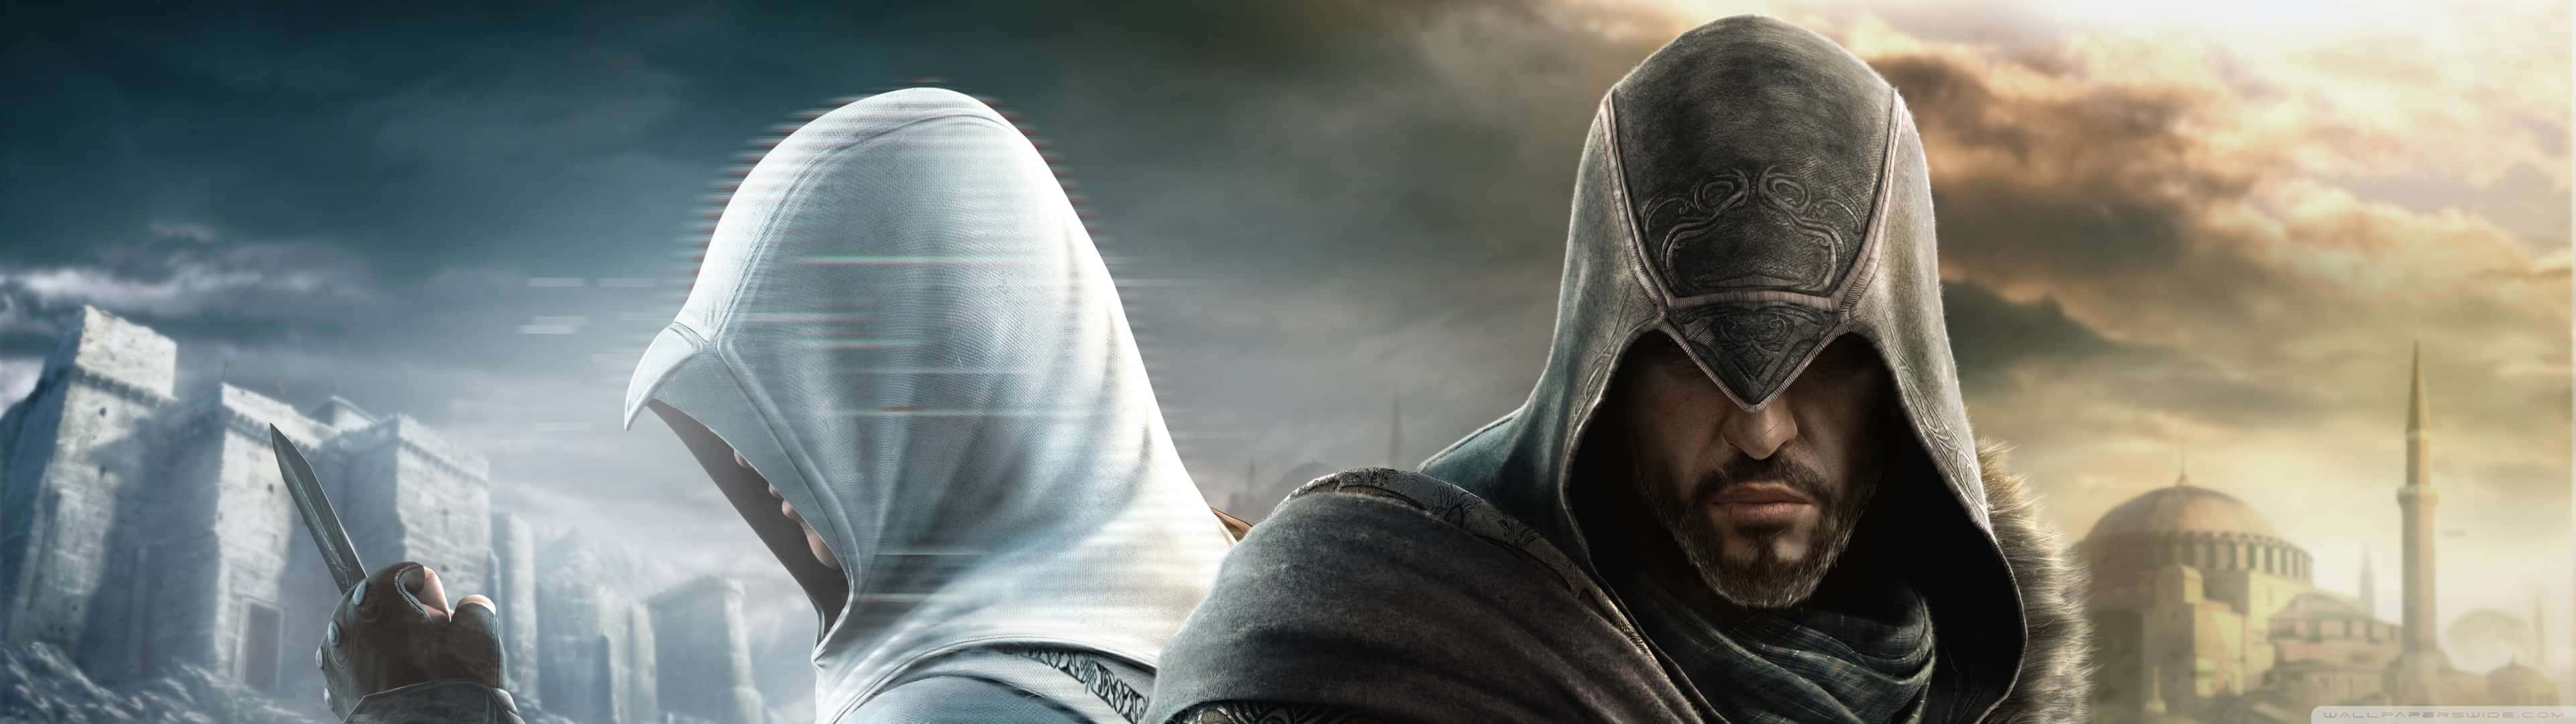 Desmond Miles in action in the world of Assassin's Creed Wallpaper